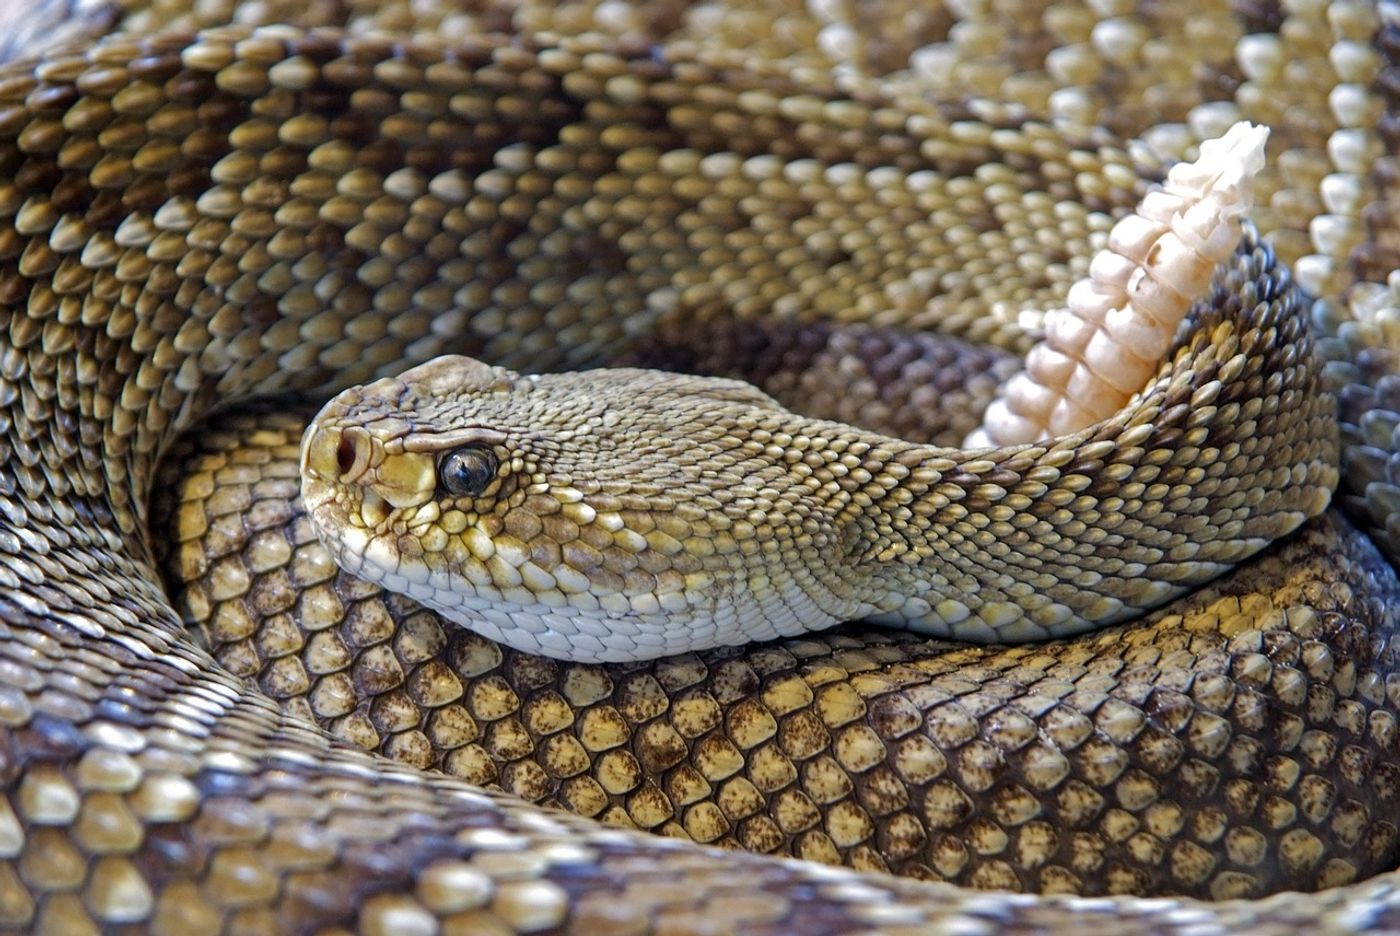 Rattlesnakes can be told apart from other species by the rattle-shaped tail.